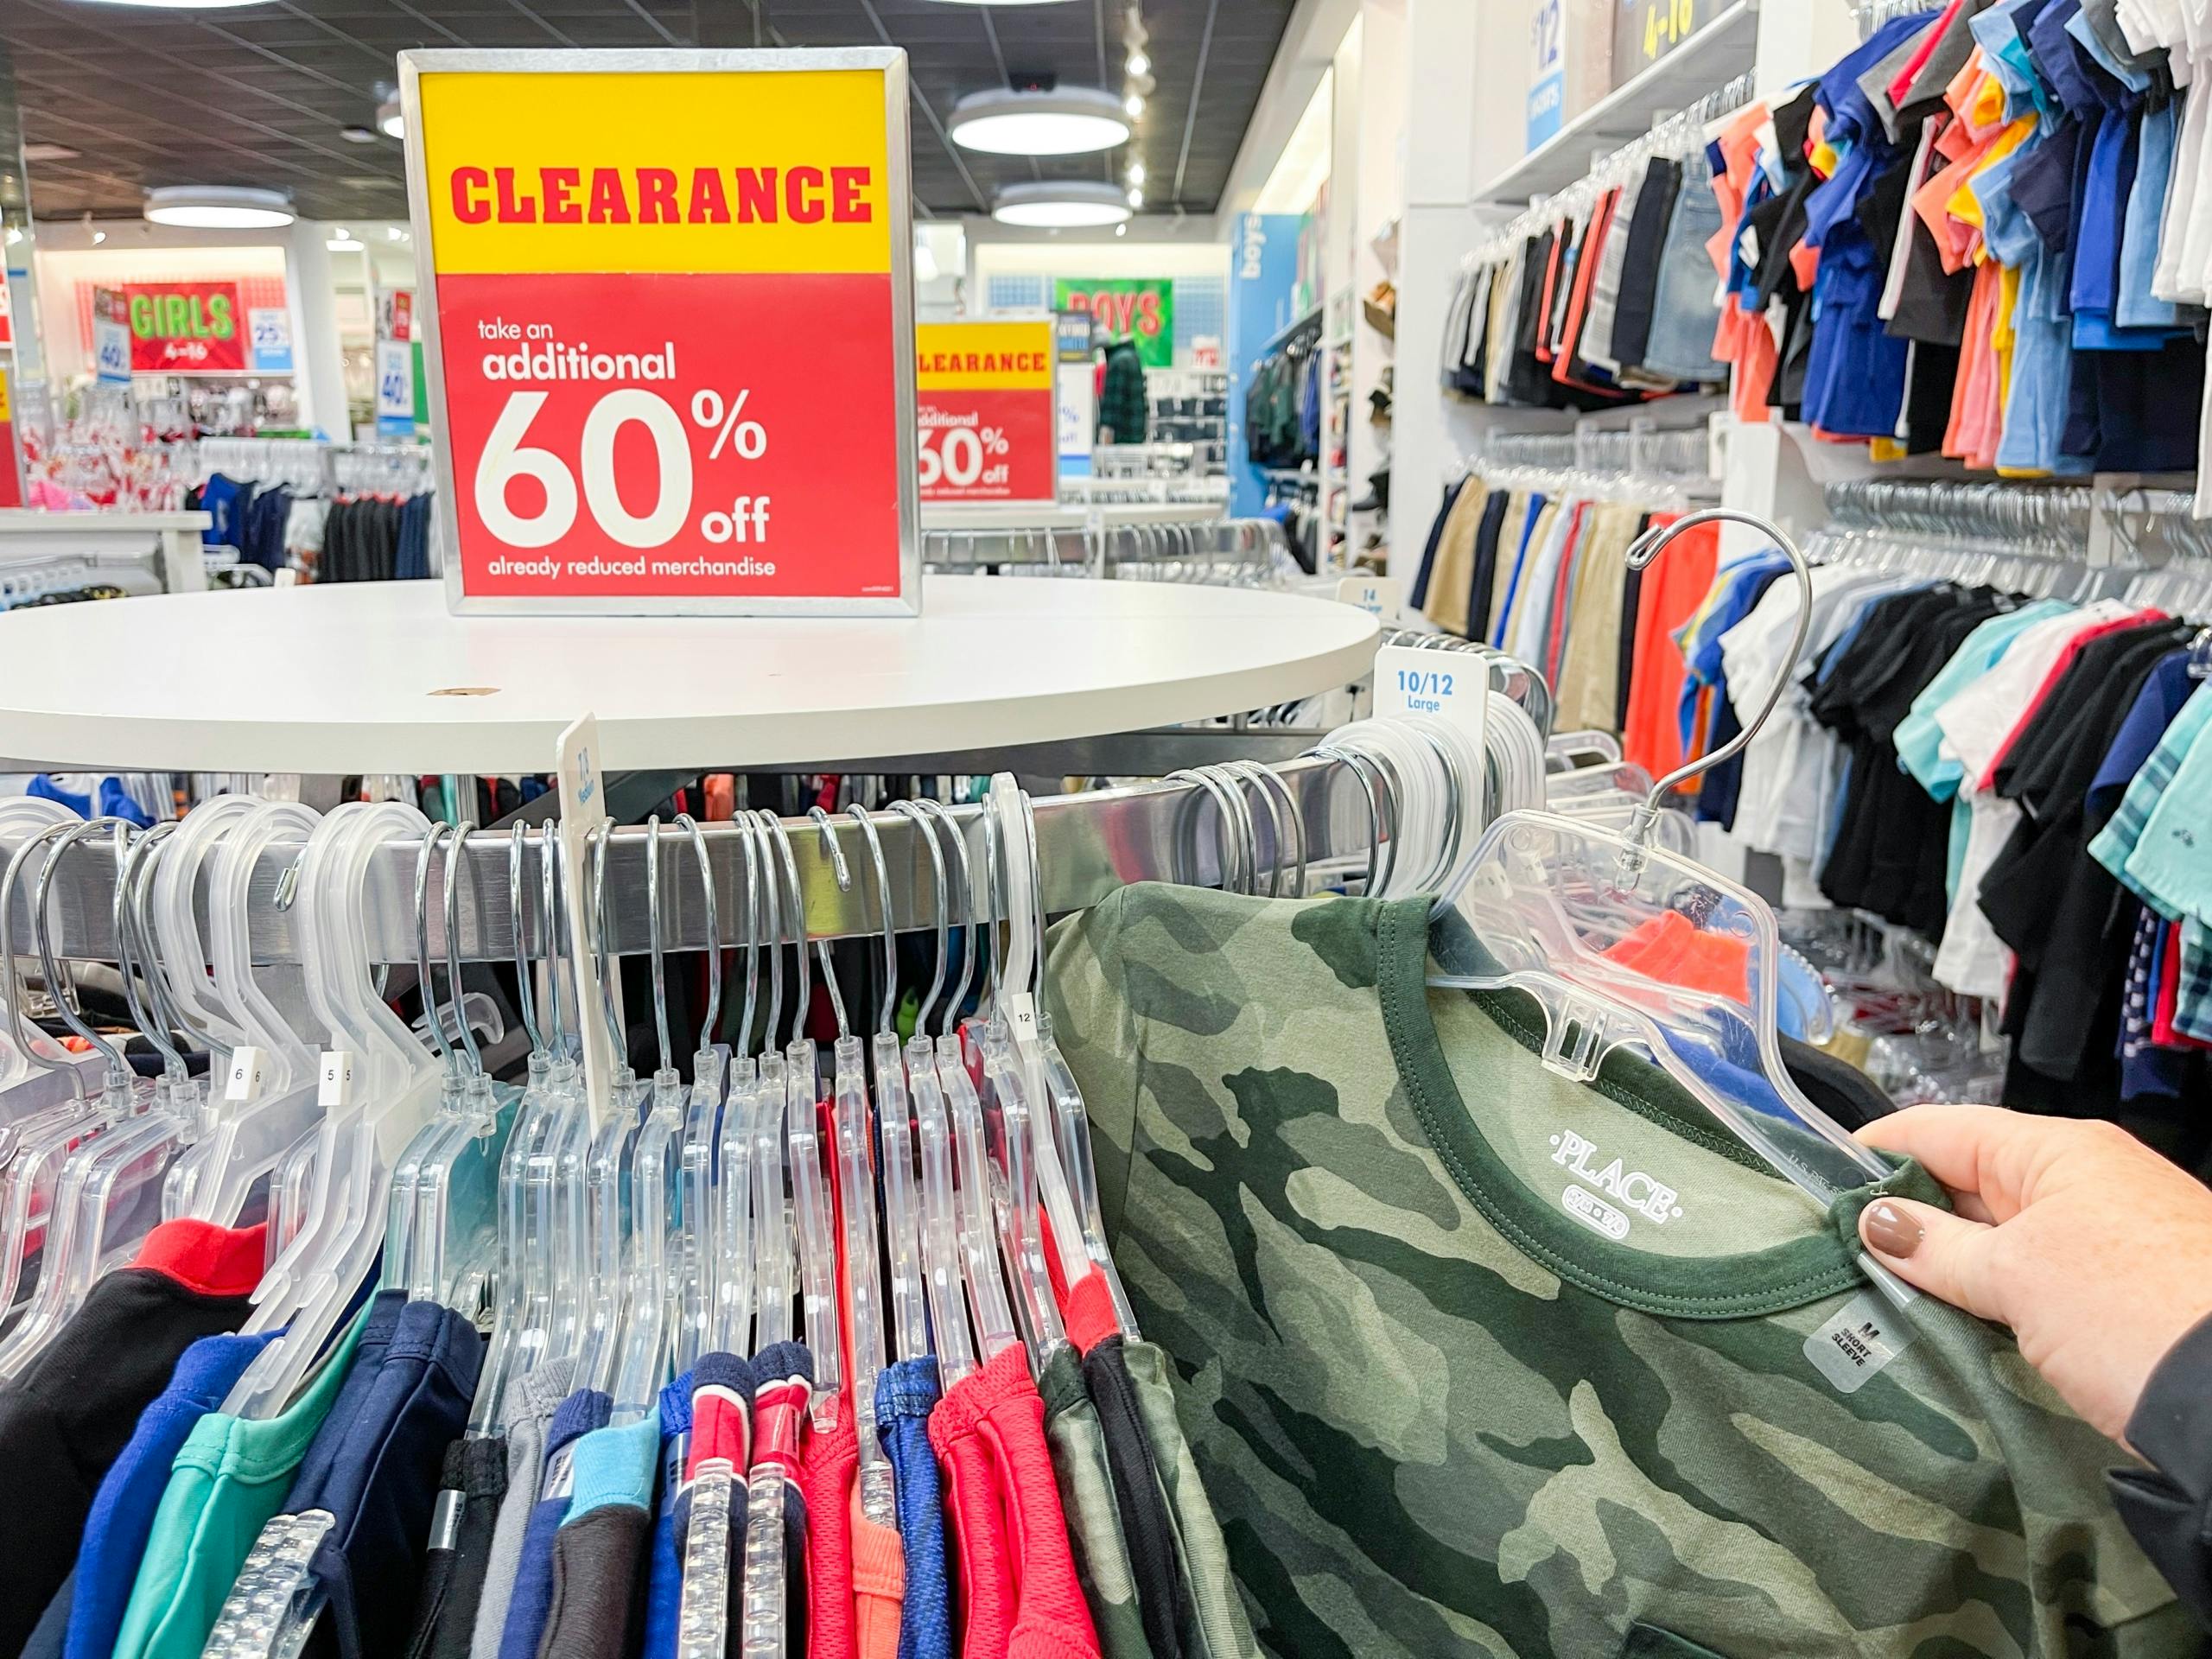 The Children's Place Clearance Sale